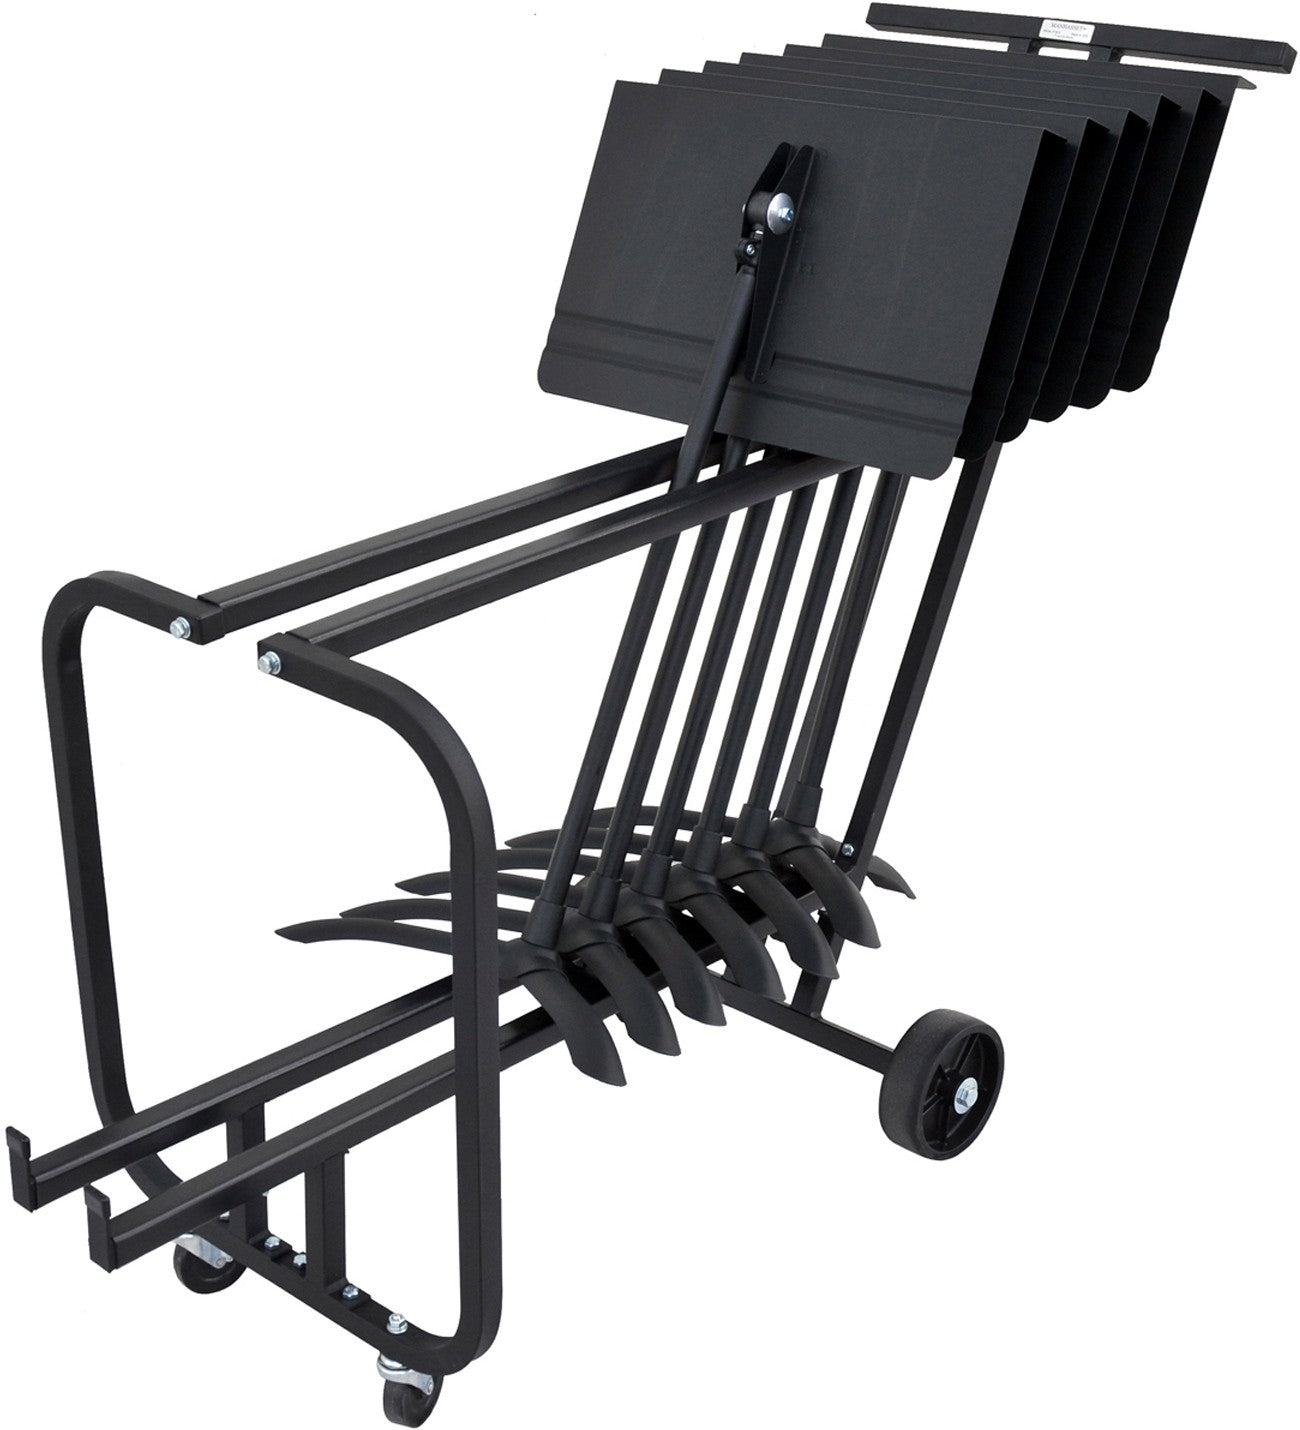 Manhasset Music Stand Trolley - Small